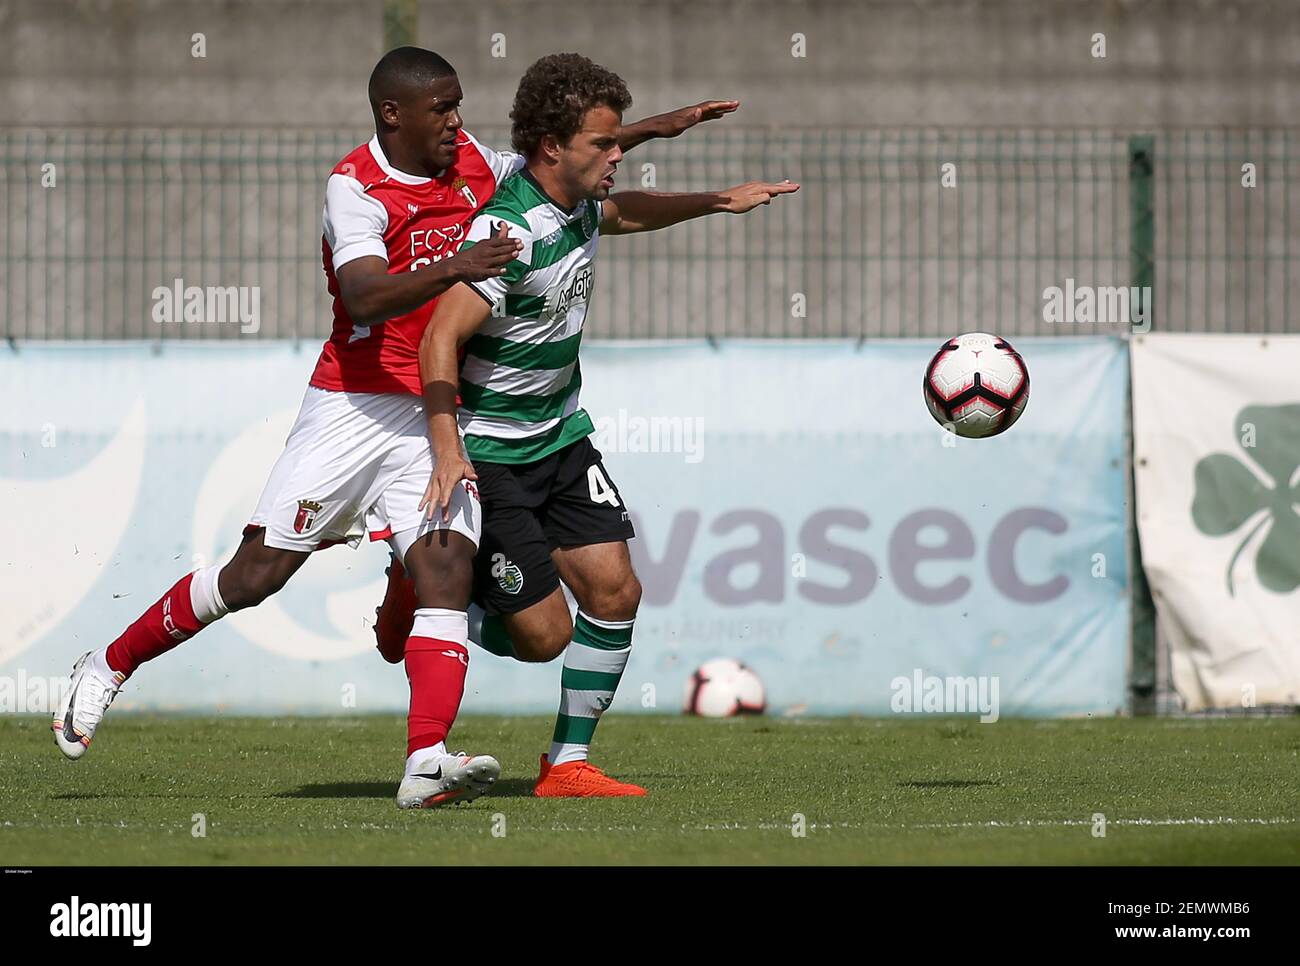 Esposende, 04/20/2019 - Sporting Clube de Braga faced Sporting Clube de  Portugal this afternoon, in the 8th round of the second stage of the Liga  Revelação sub-23, Champion'swdown. The The game was